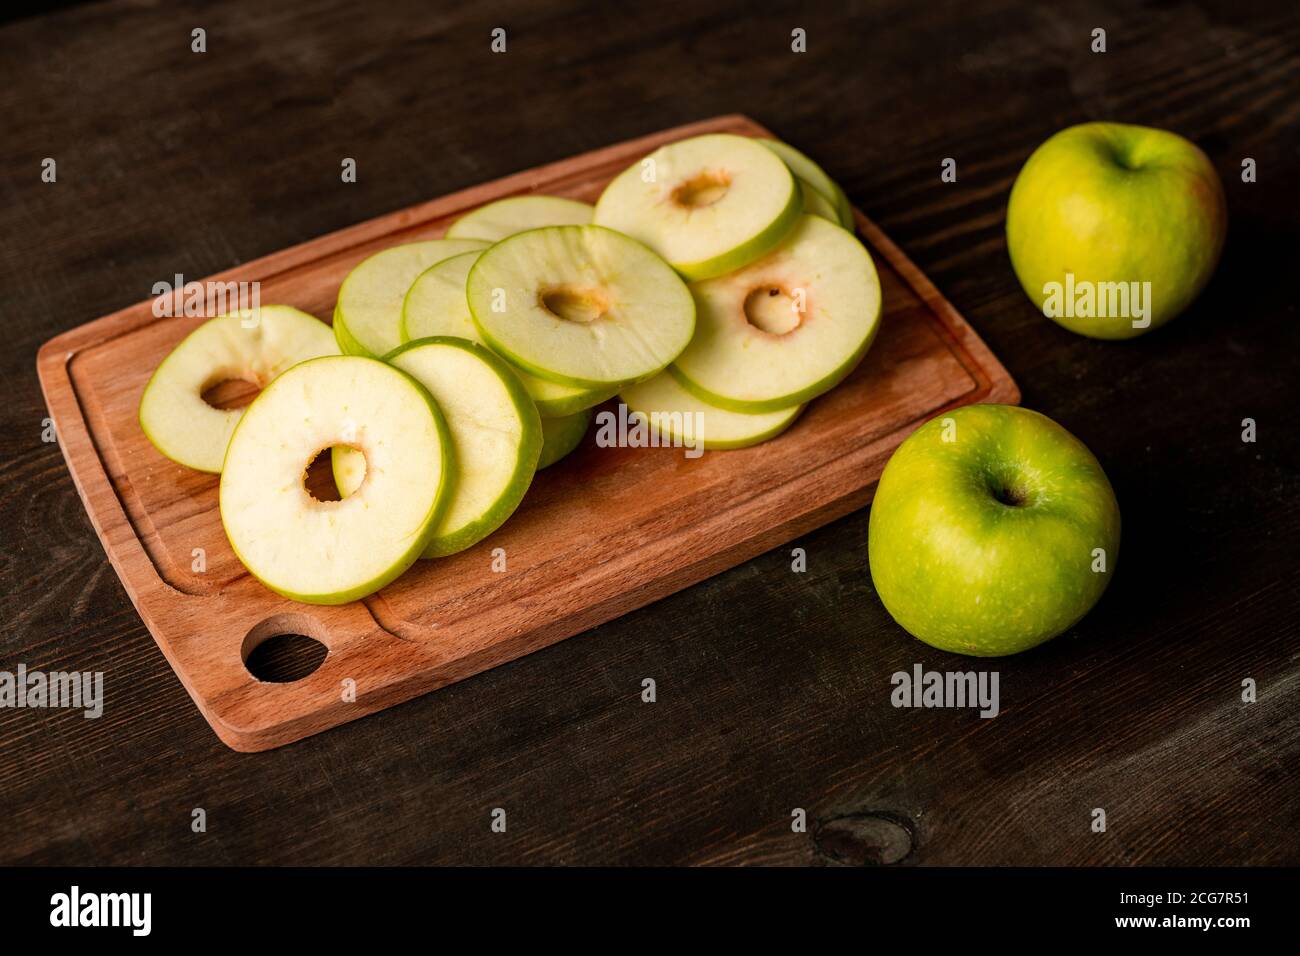 Close-up of green apple slices on cutting board and ripe apples on kitchen table, cooking concept Stock Photo